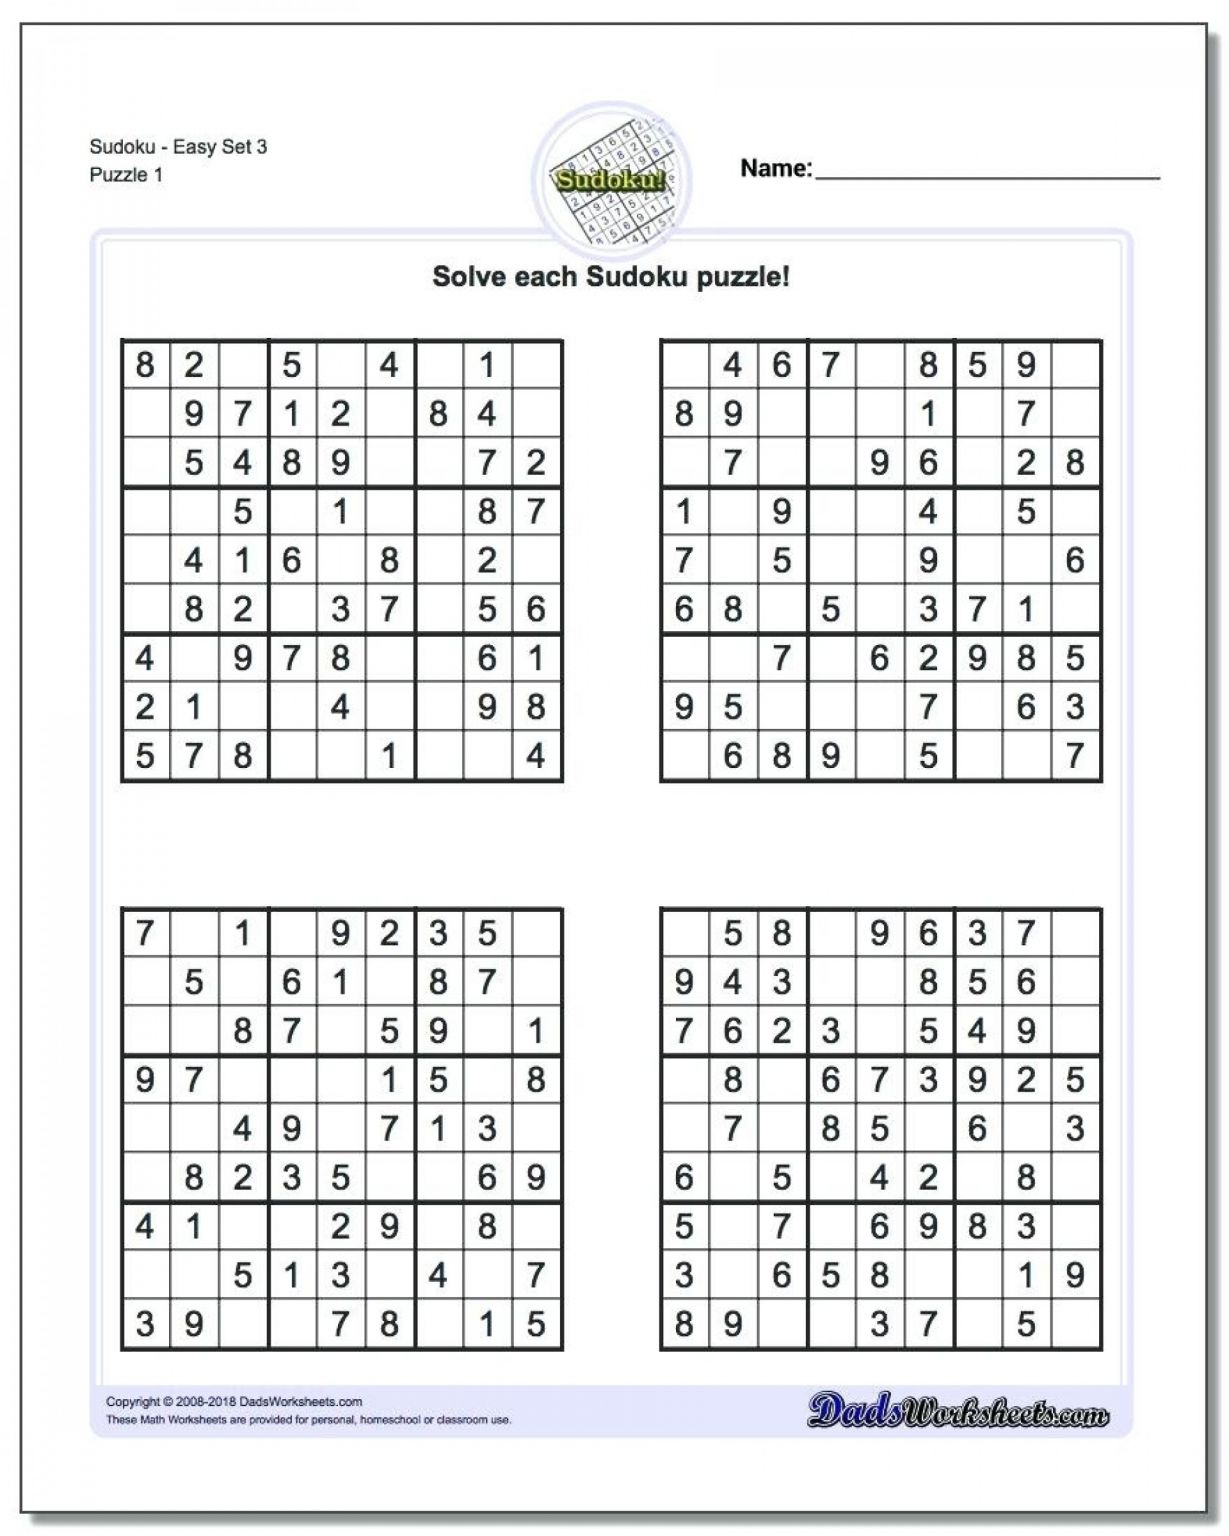 5-free-math-worksheets-third-grade-3-fractions-and-decimals-comparing-fractions-like